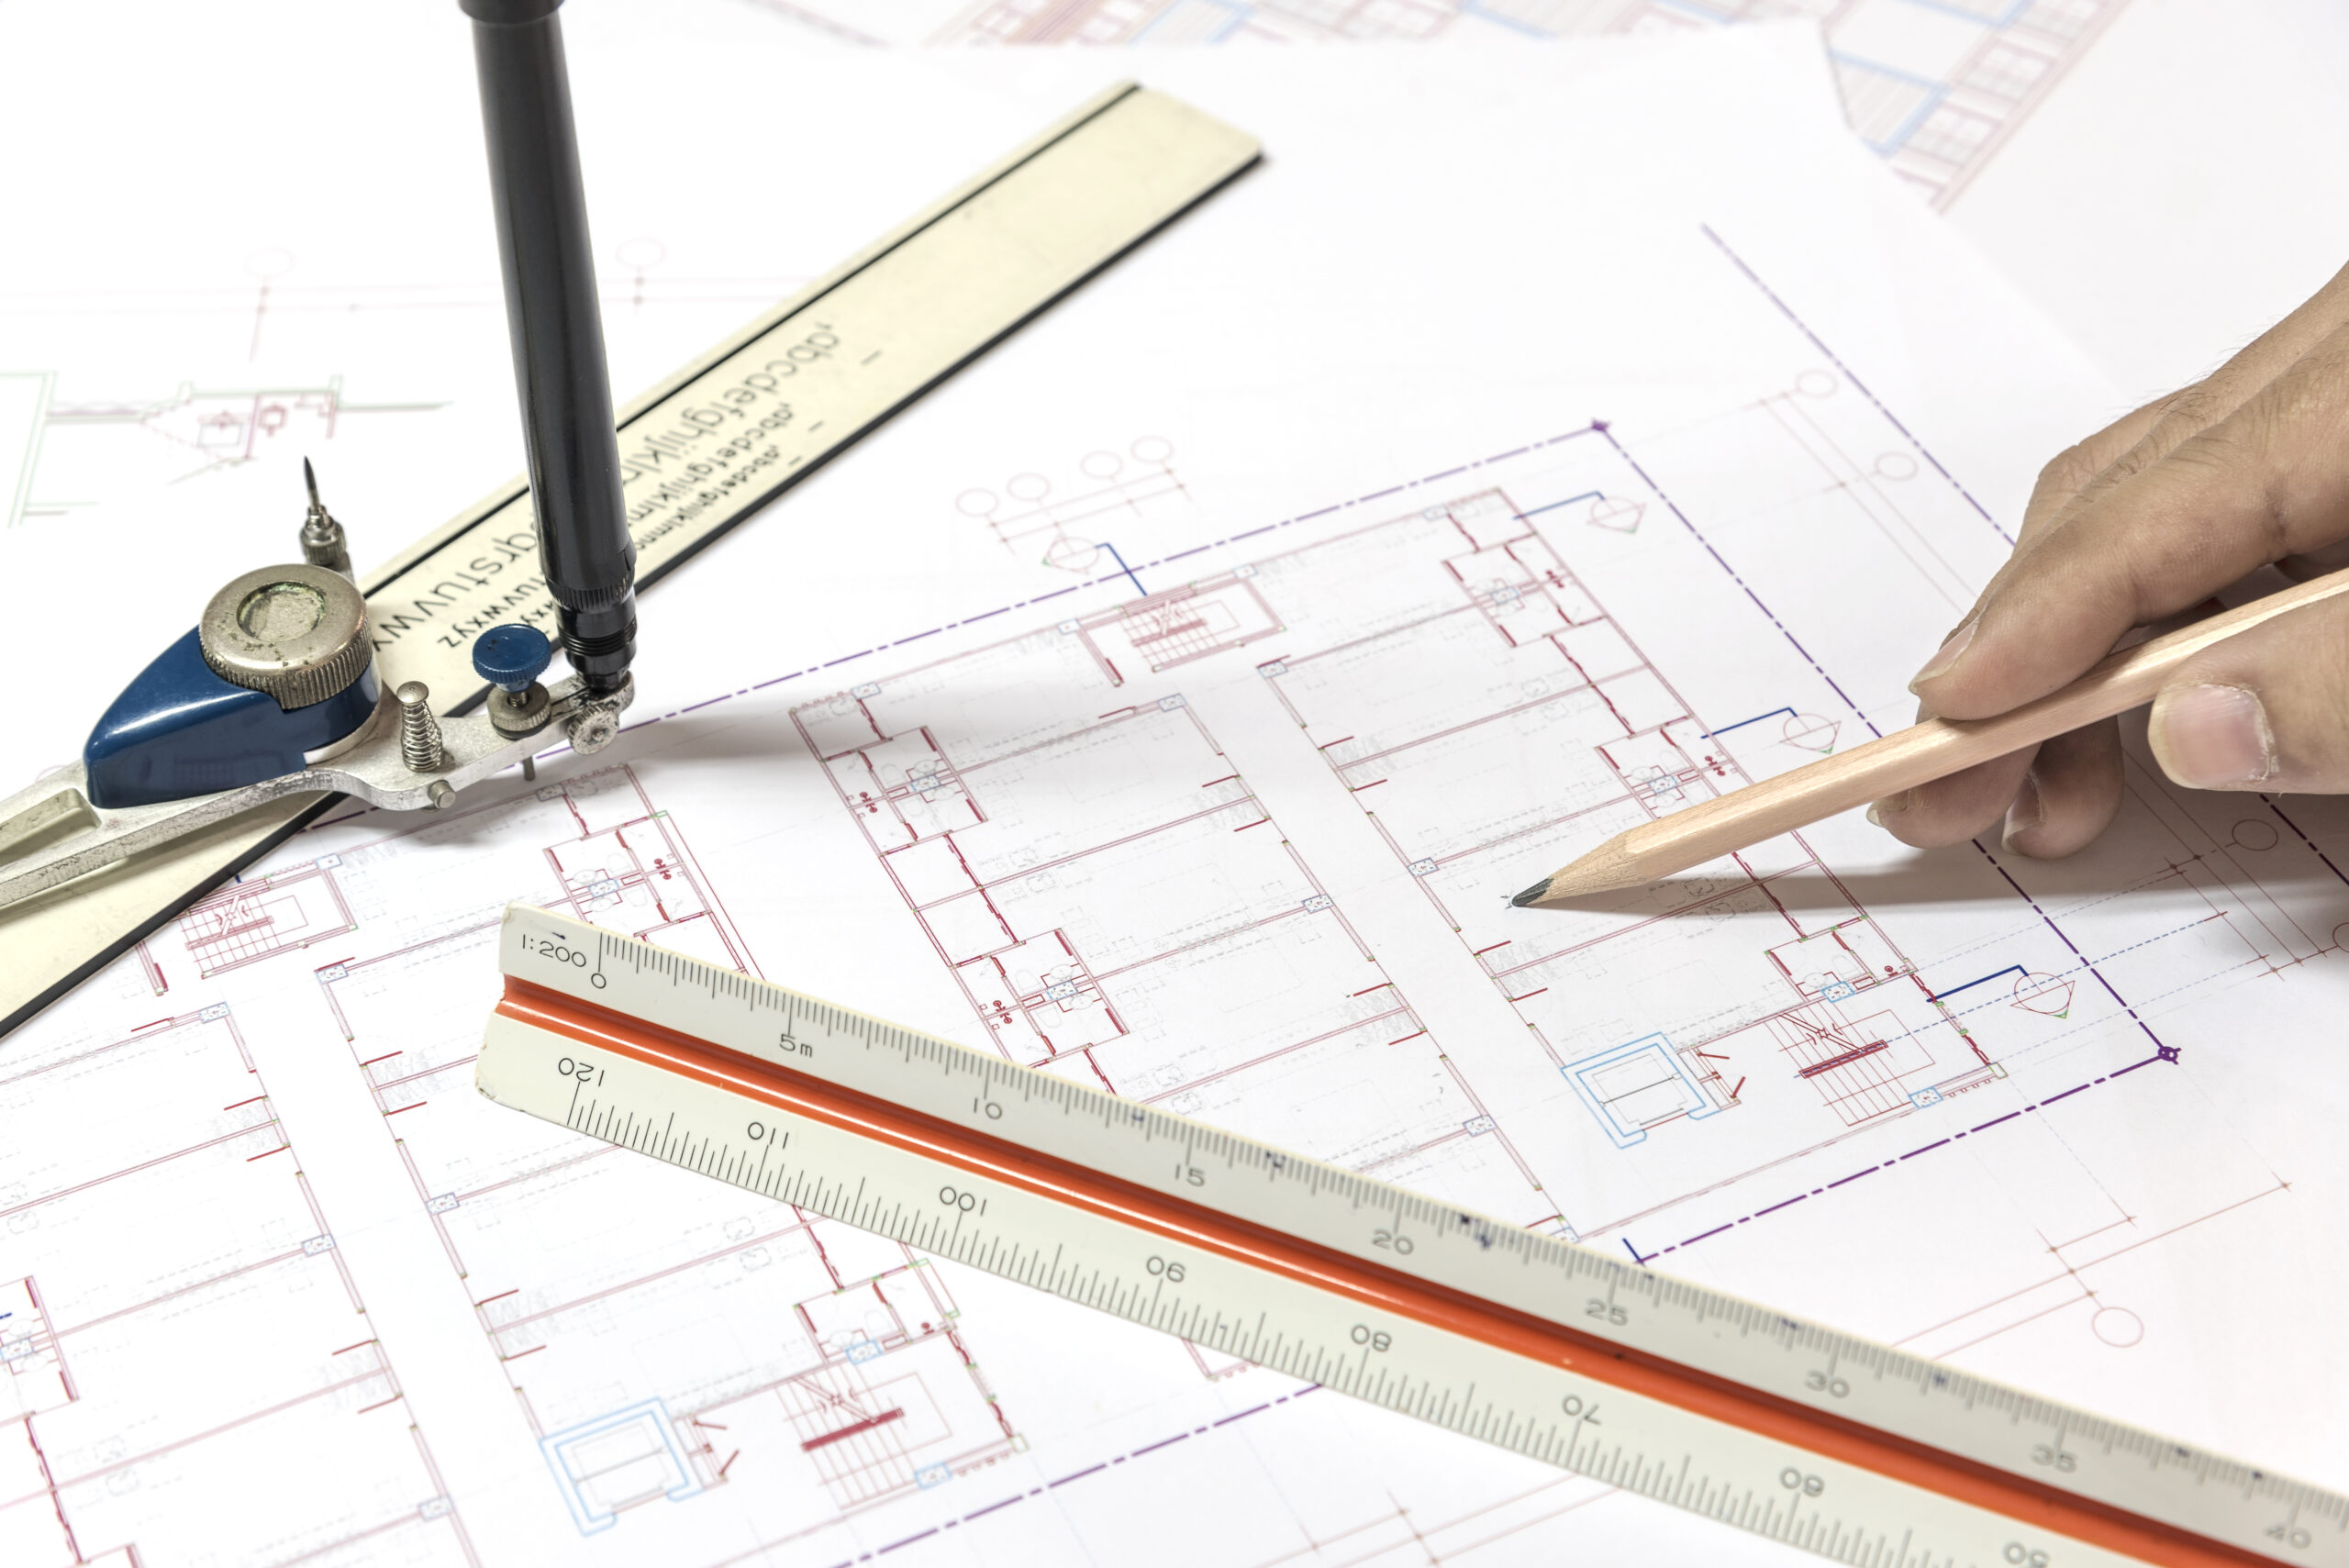 Detailed Drawings (Structural, Electrical, Plumbing, Working Drawings)